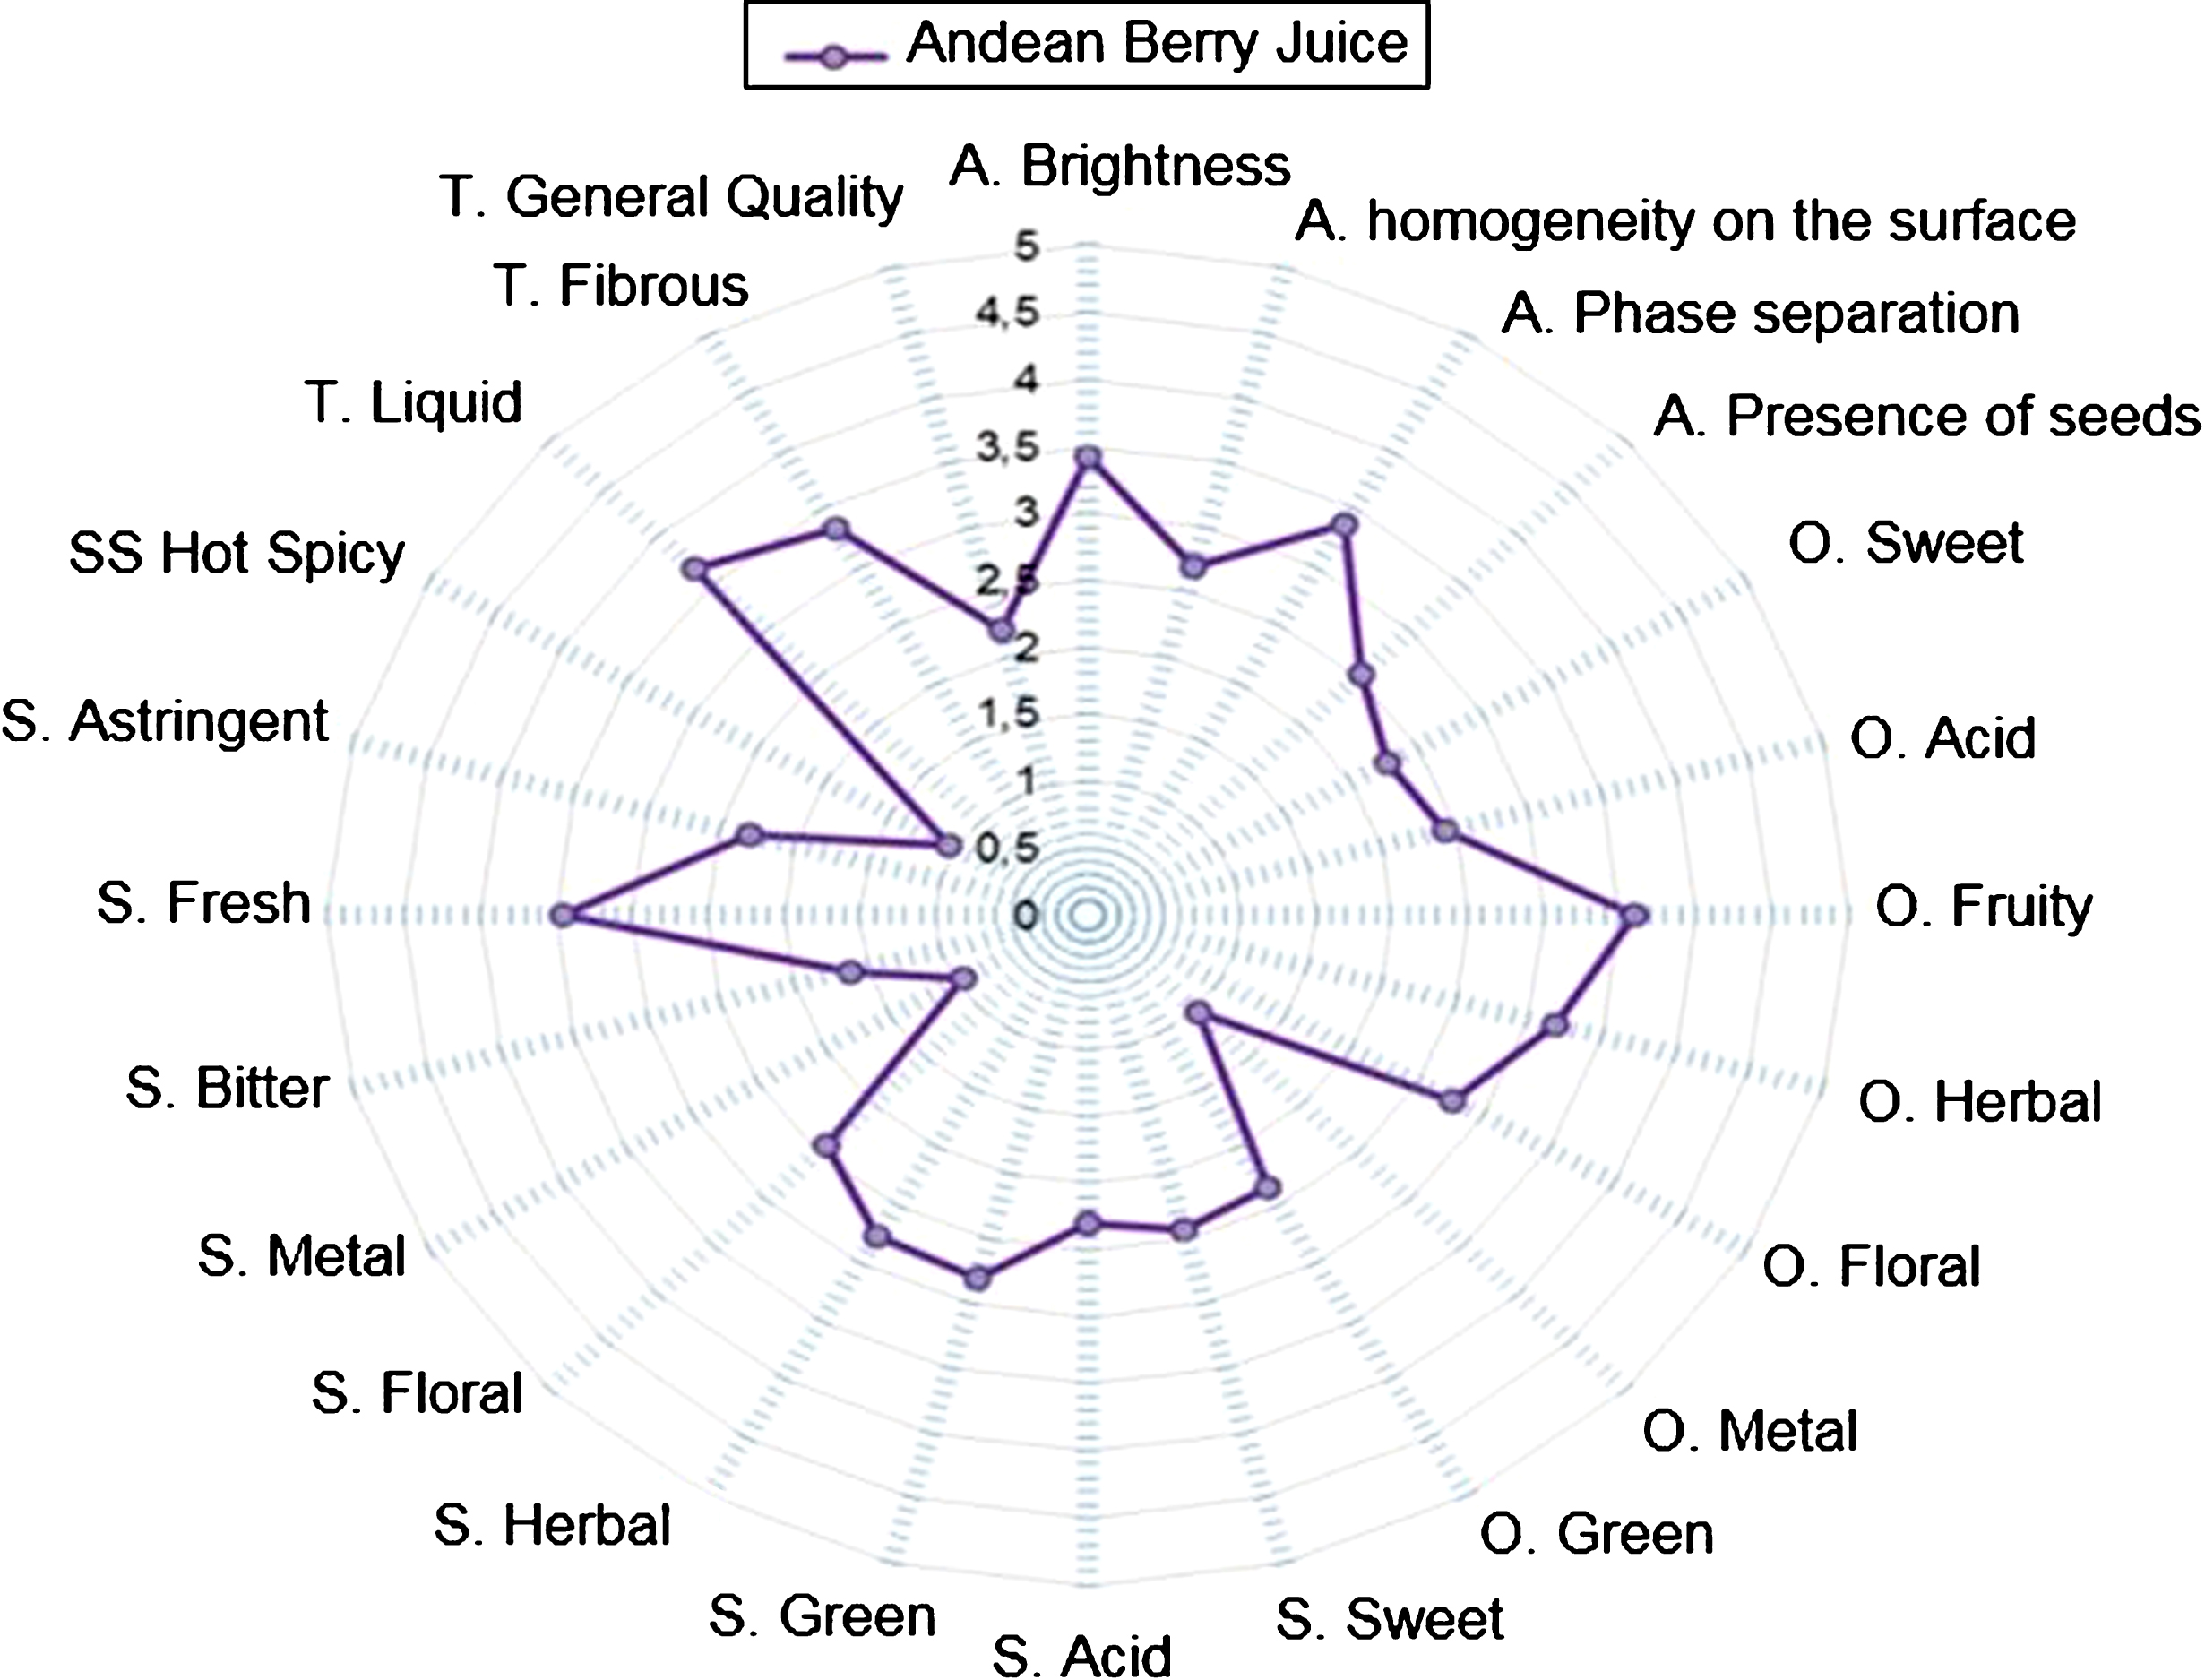 Sensory profile of the ABJ. Conventions; A: appearance, O: smell, F: taste, T: texture.